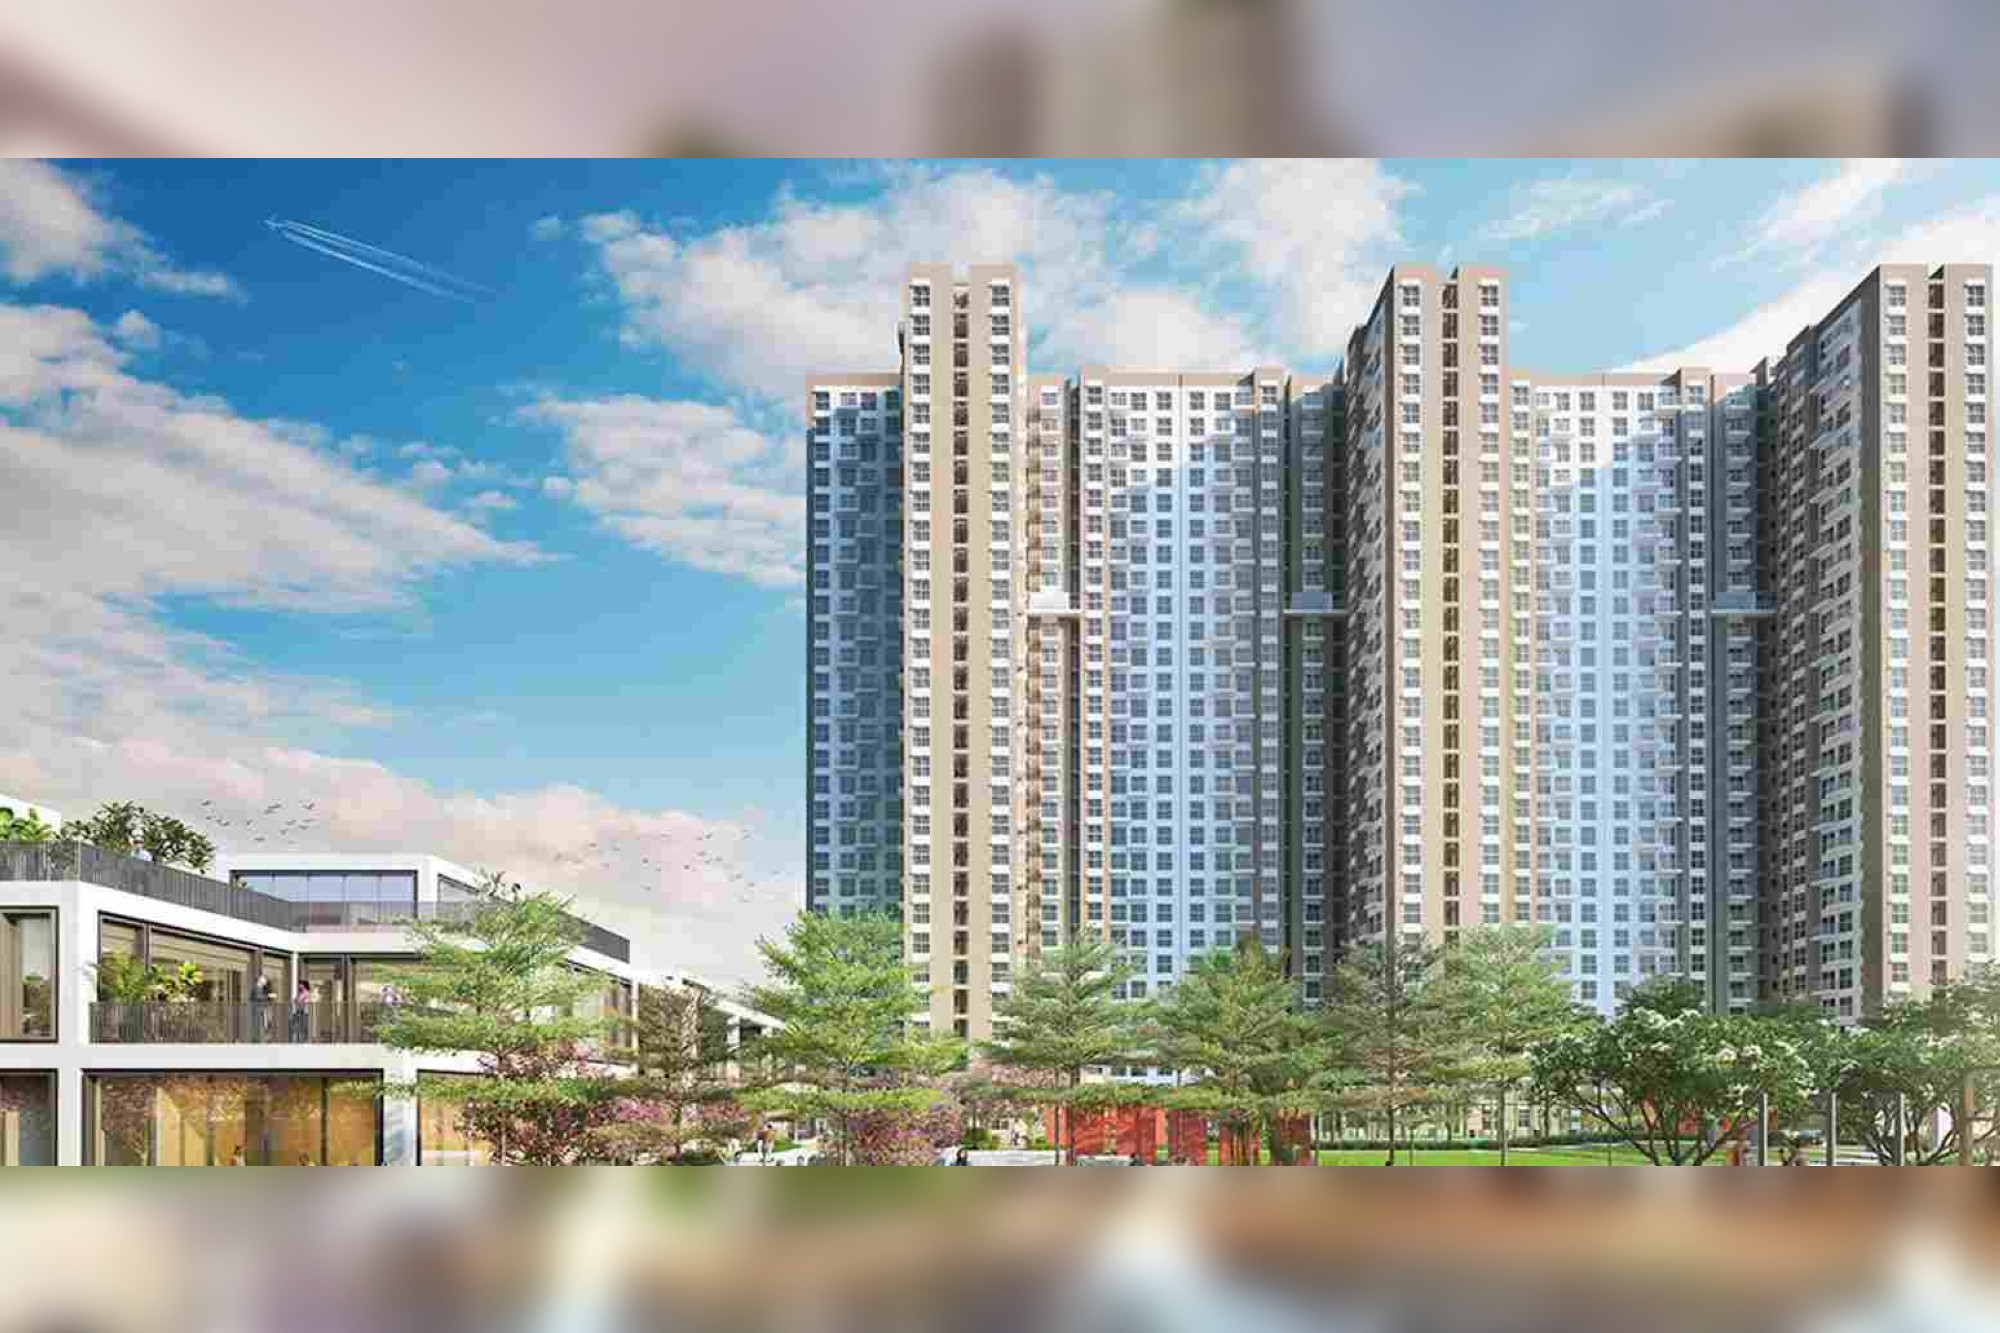 Godrej Properties has finalised agreements to embark on a significant township venture in North Bengaluru, employing a profit-sharing model.